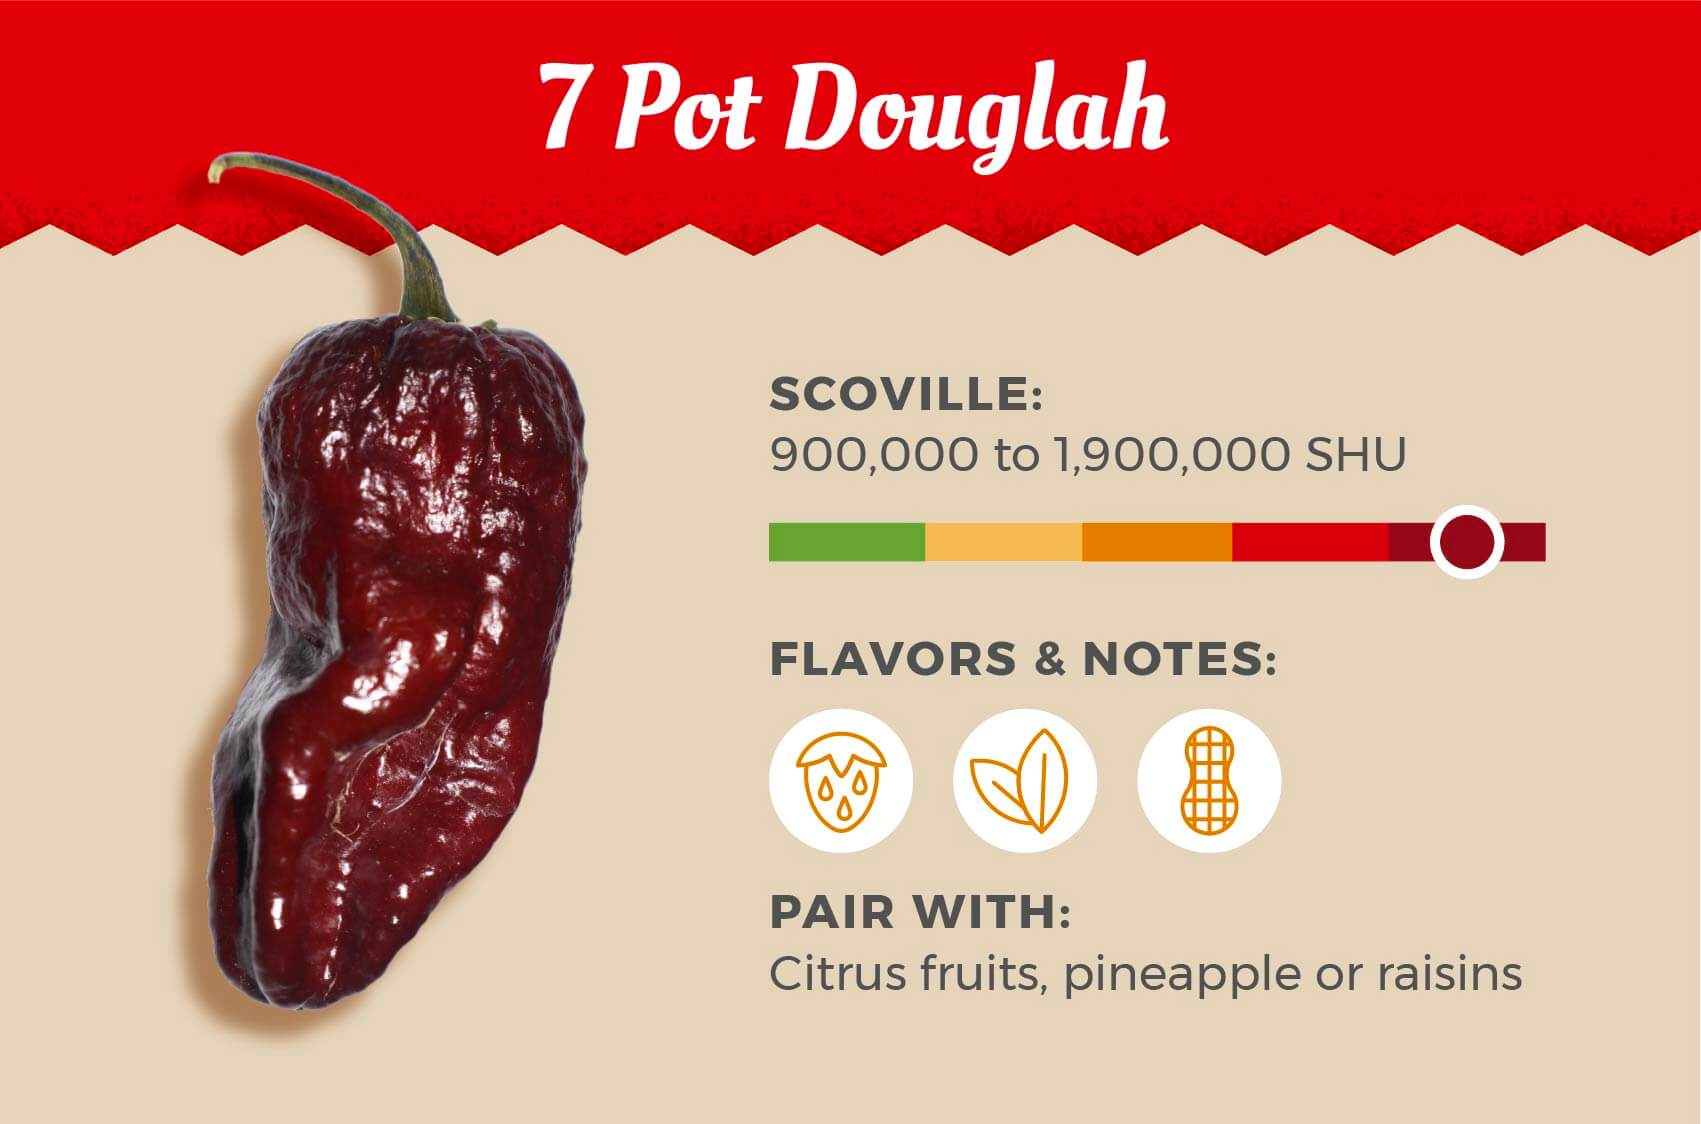 7 Pot Douglah is the number 2 hottest pepper on this list with a high score of 1.9 million Scoville heat units, pair it with citrus fruits, pineapple or raisins.